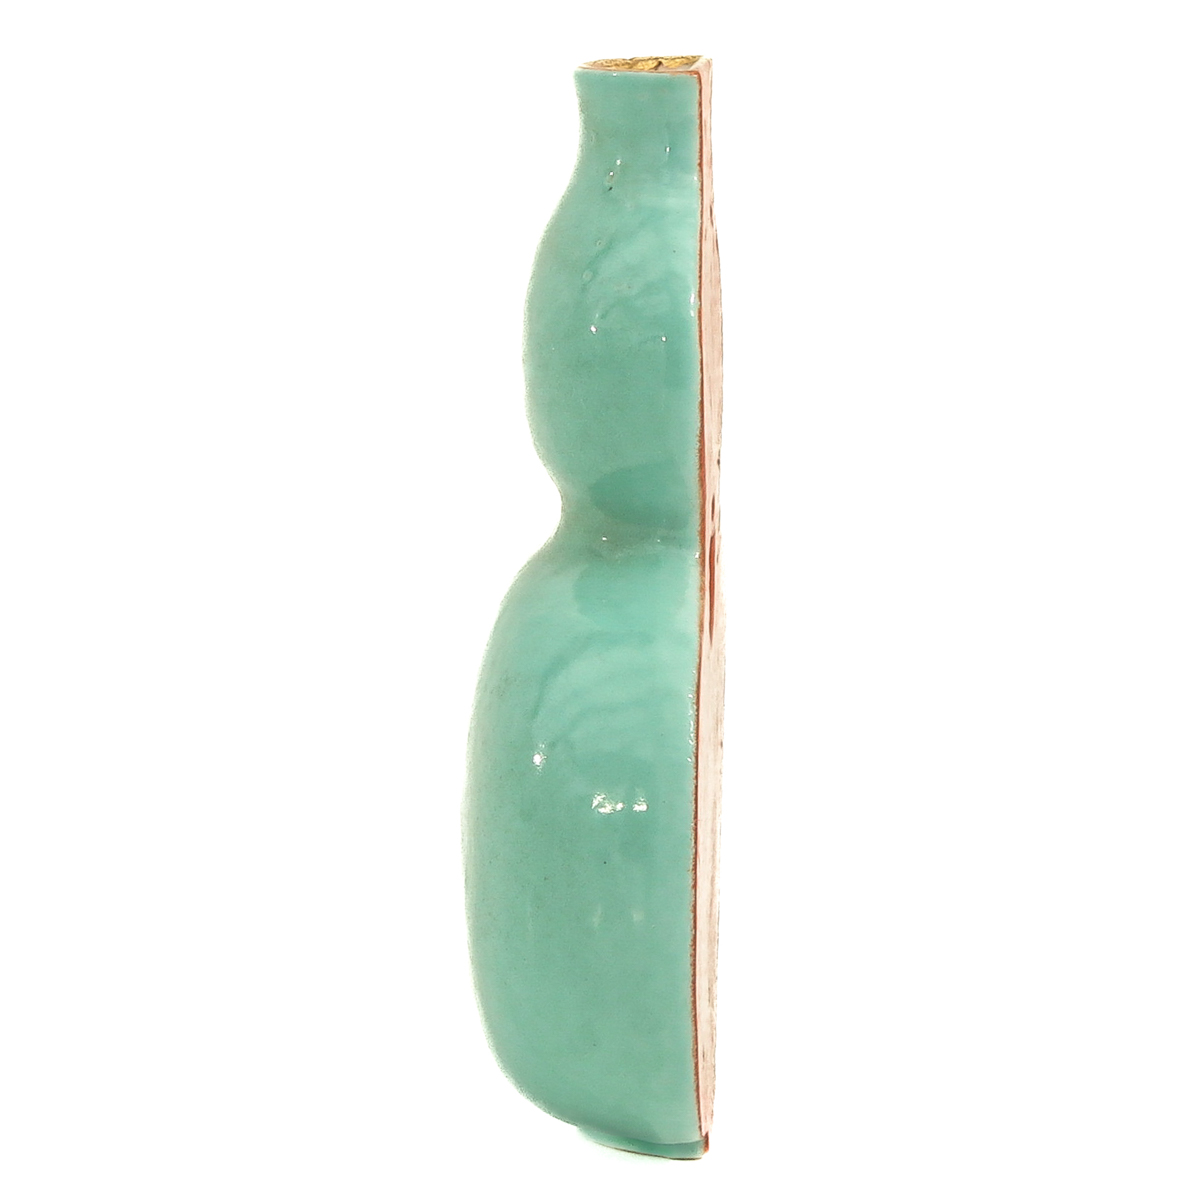 A Green Glaze Wall Vase - Image 2 of 10